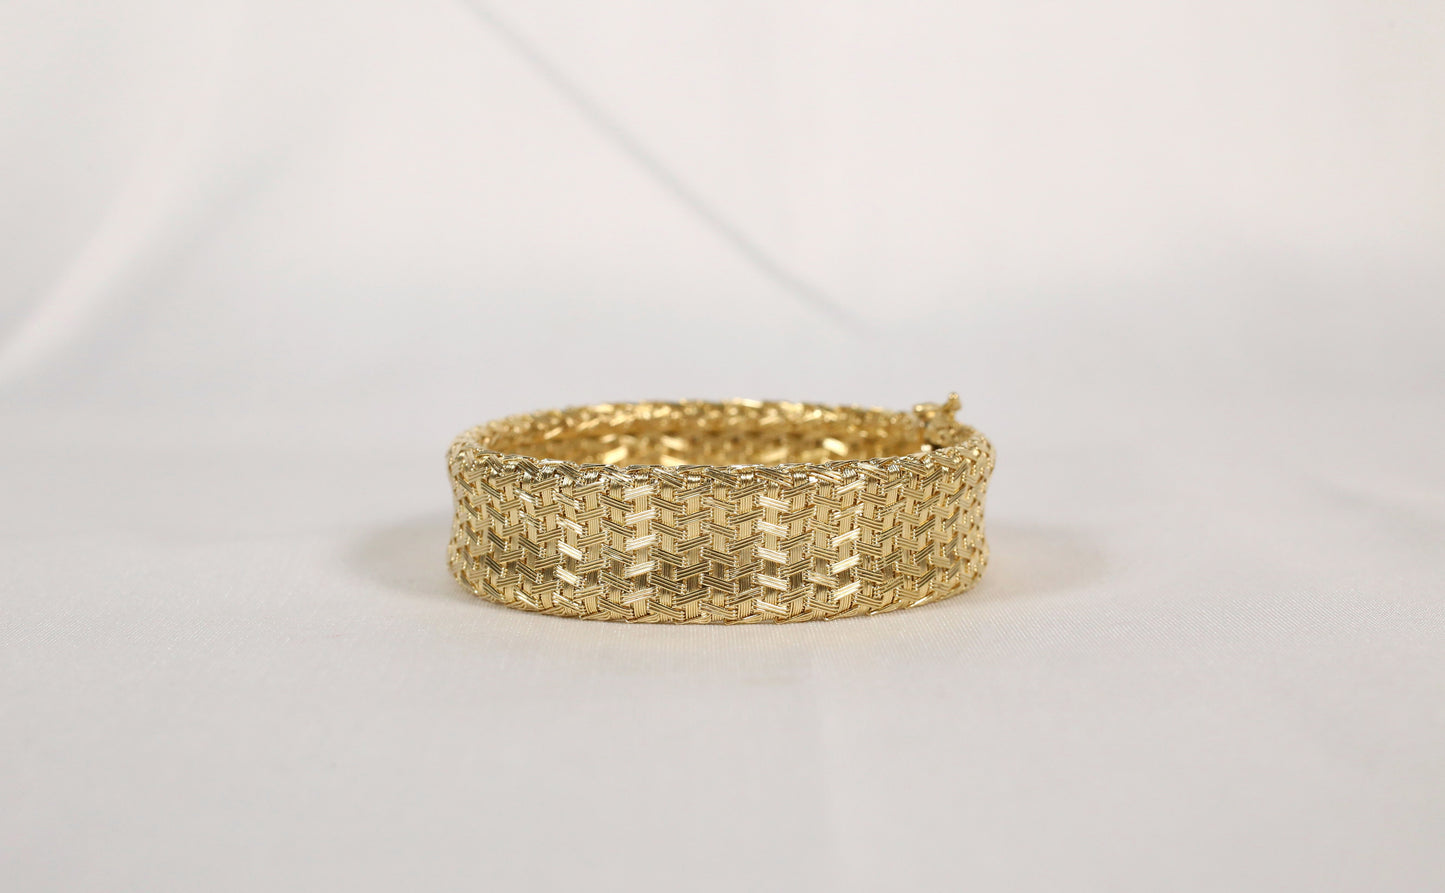 14k Yellow Gold Woven Bracelet, 7.5 inches - 39.9g